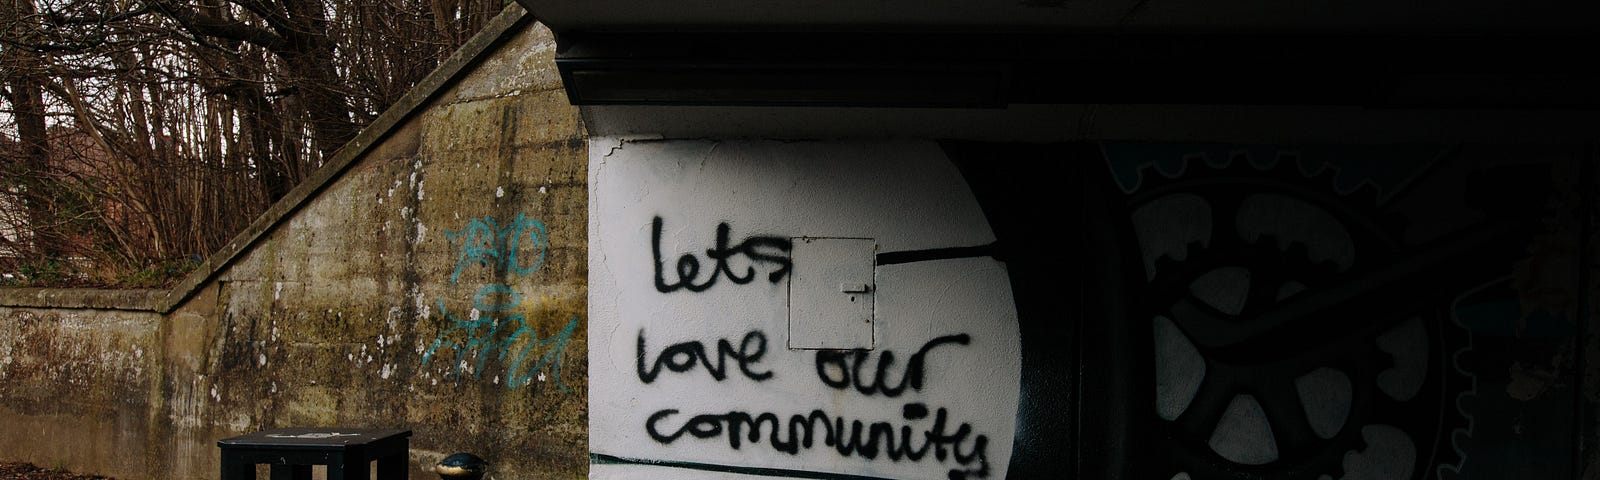 A picture of a street under a bridge where the graffiti says, “Let’s love our community”